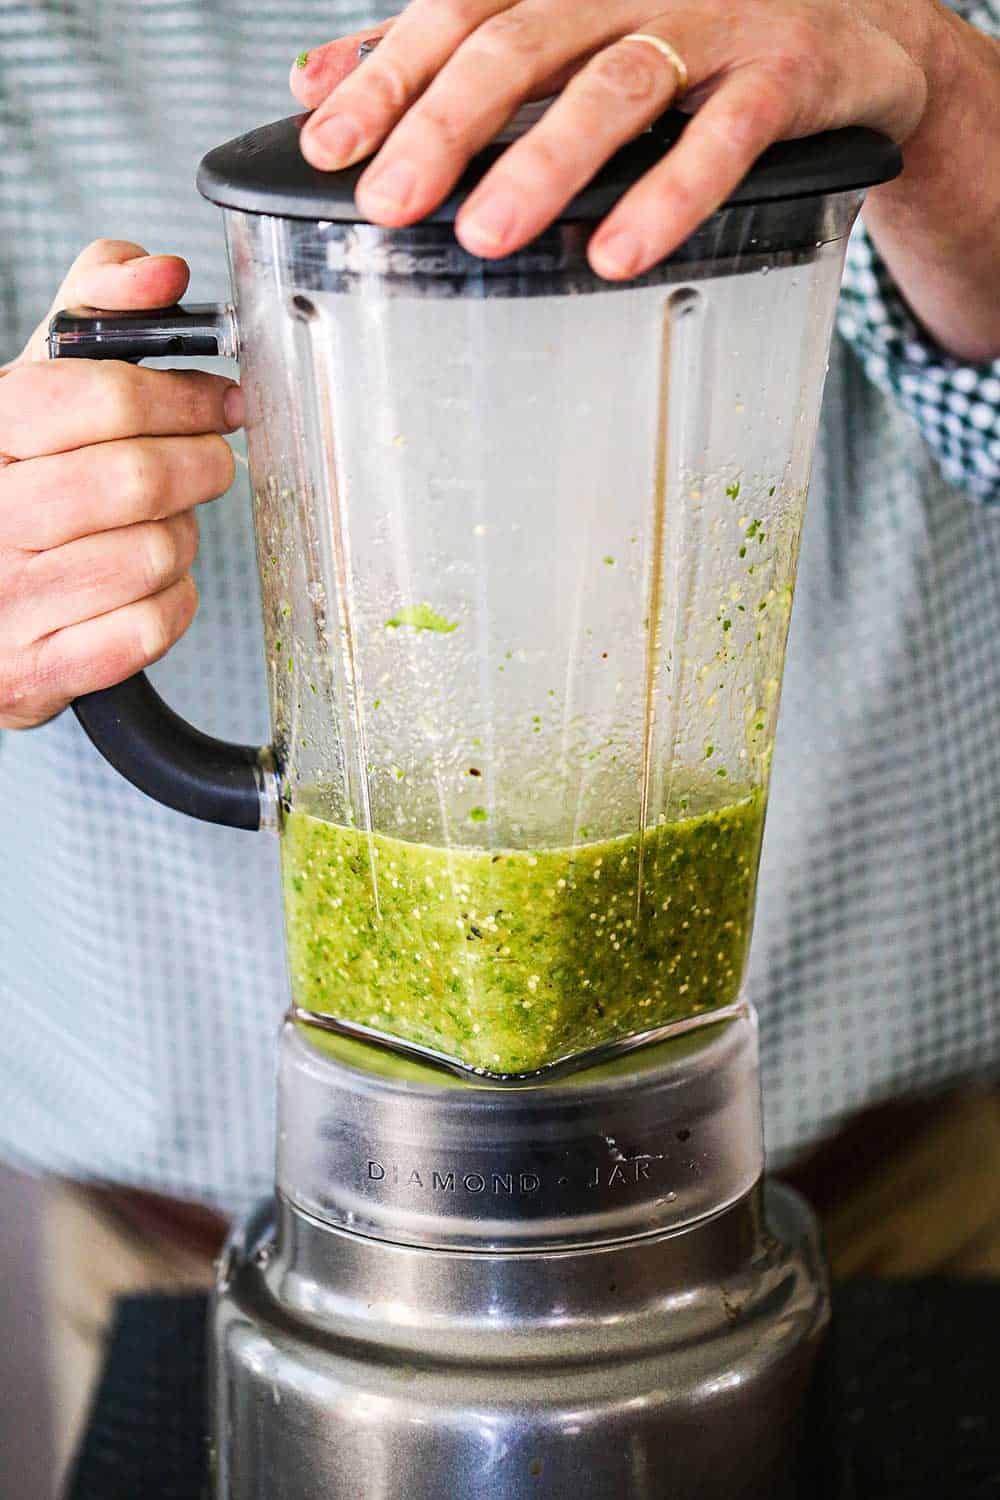 A person holding onto the lid of a blender that is filled with puréed salsa verde.